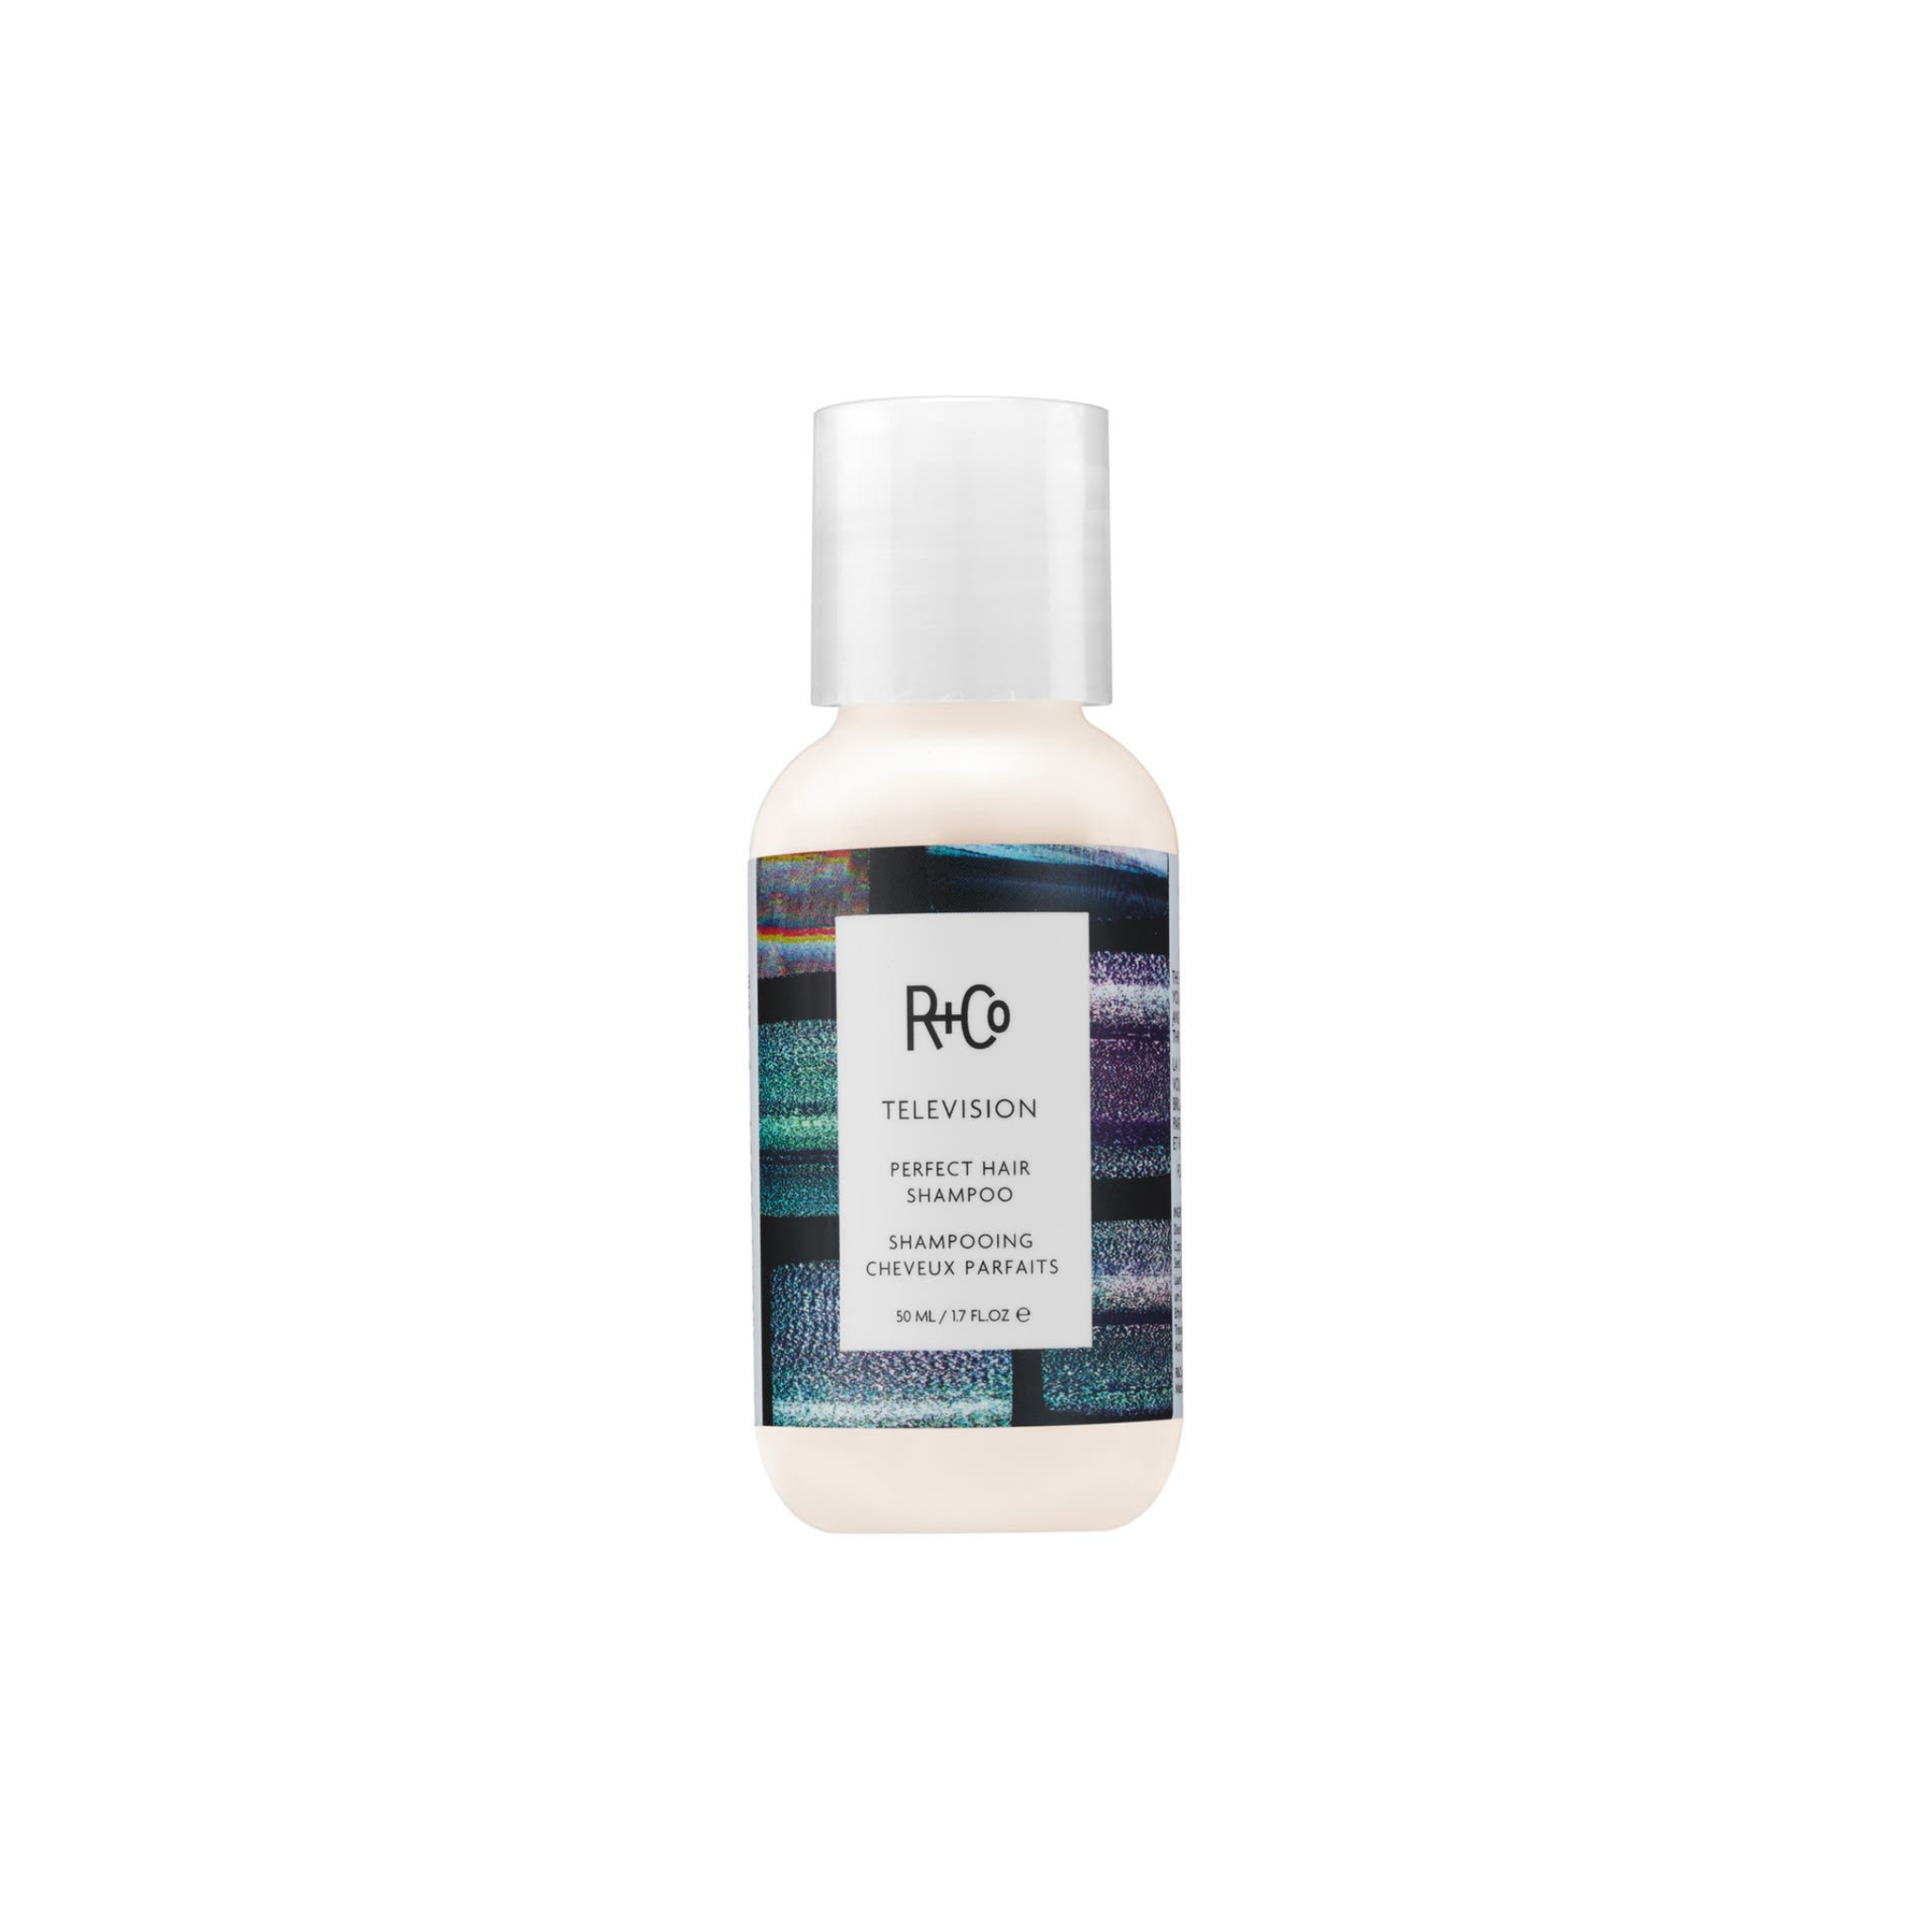 R+Co. Television Shampoing Cheveux Parfaits - 50 ml